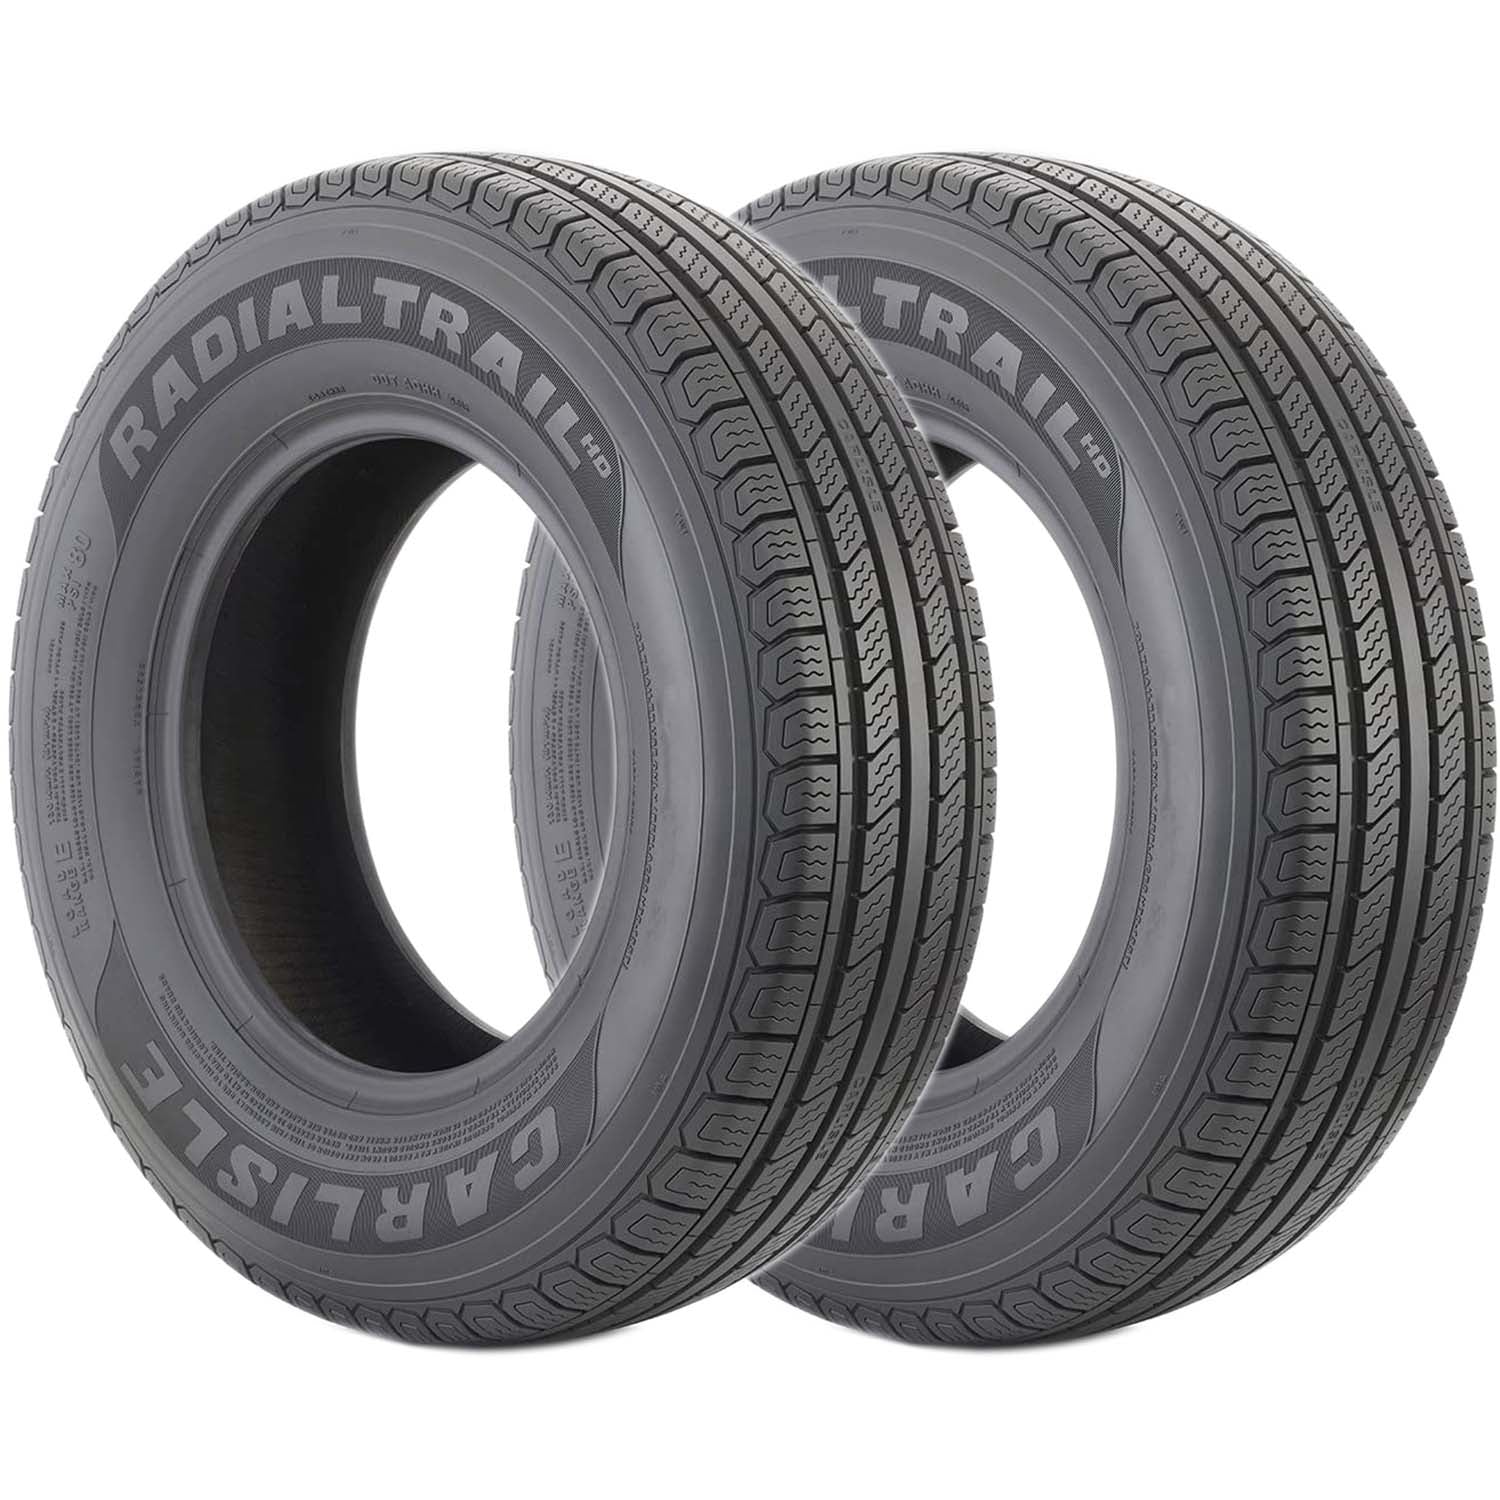 Carlisle Radial Trail HD Trailer Tire LRC 6ply ST185/80R13 Pack of 2